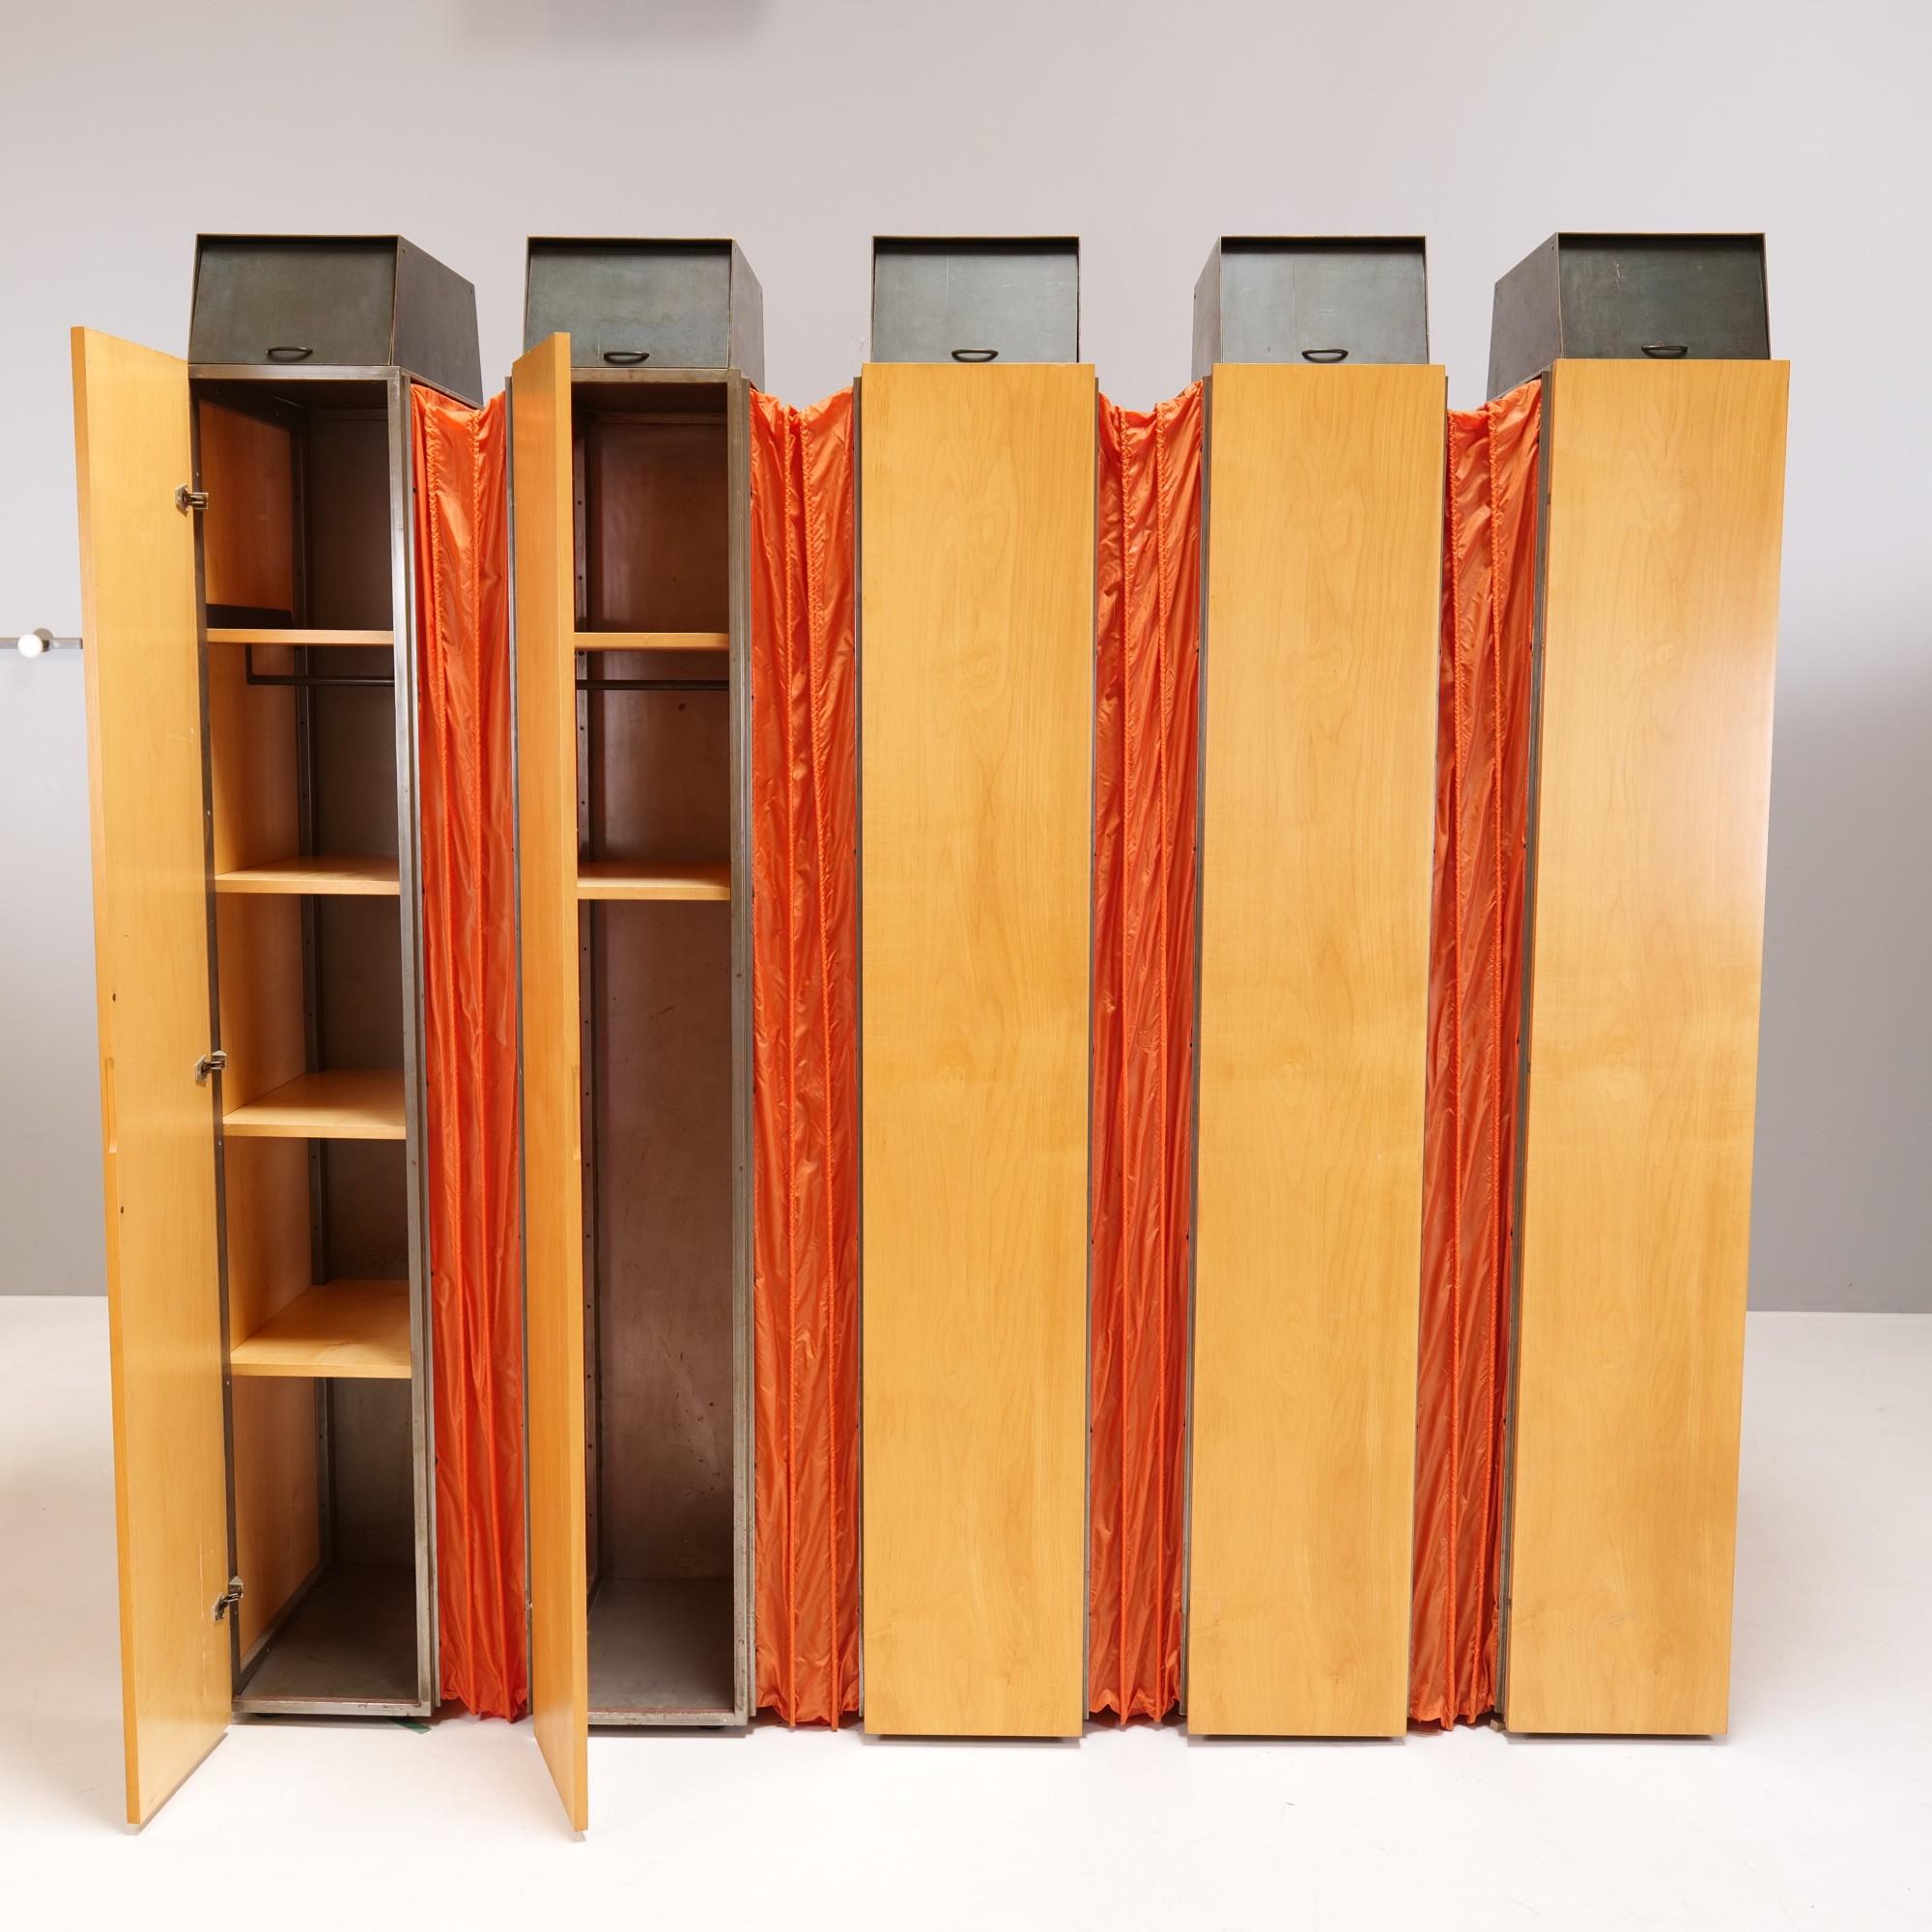 “Wagon Lit”, a cabinet divided into five individual single-door elements by the group Pentagon, designed by group member Detlef Meyer-Voggenreiter.
The individual elements are in turn connected, similar to an accordion, with unfolded fabric panels